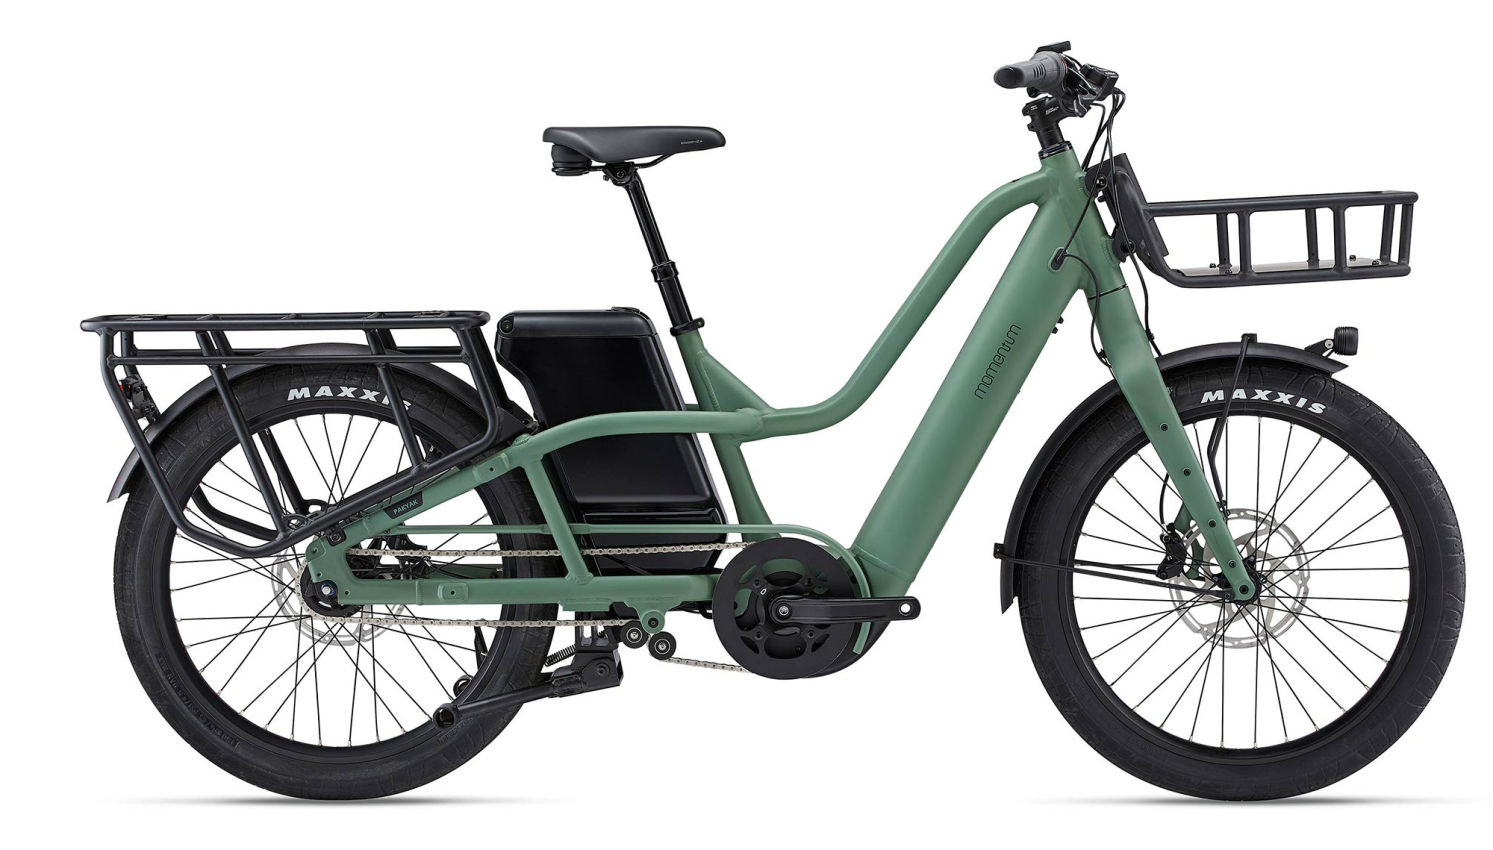 Bicycle carrier for ebikes, how to choose the right one